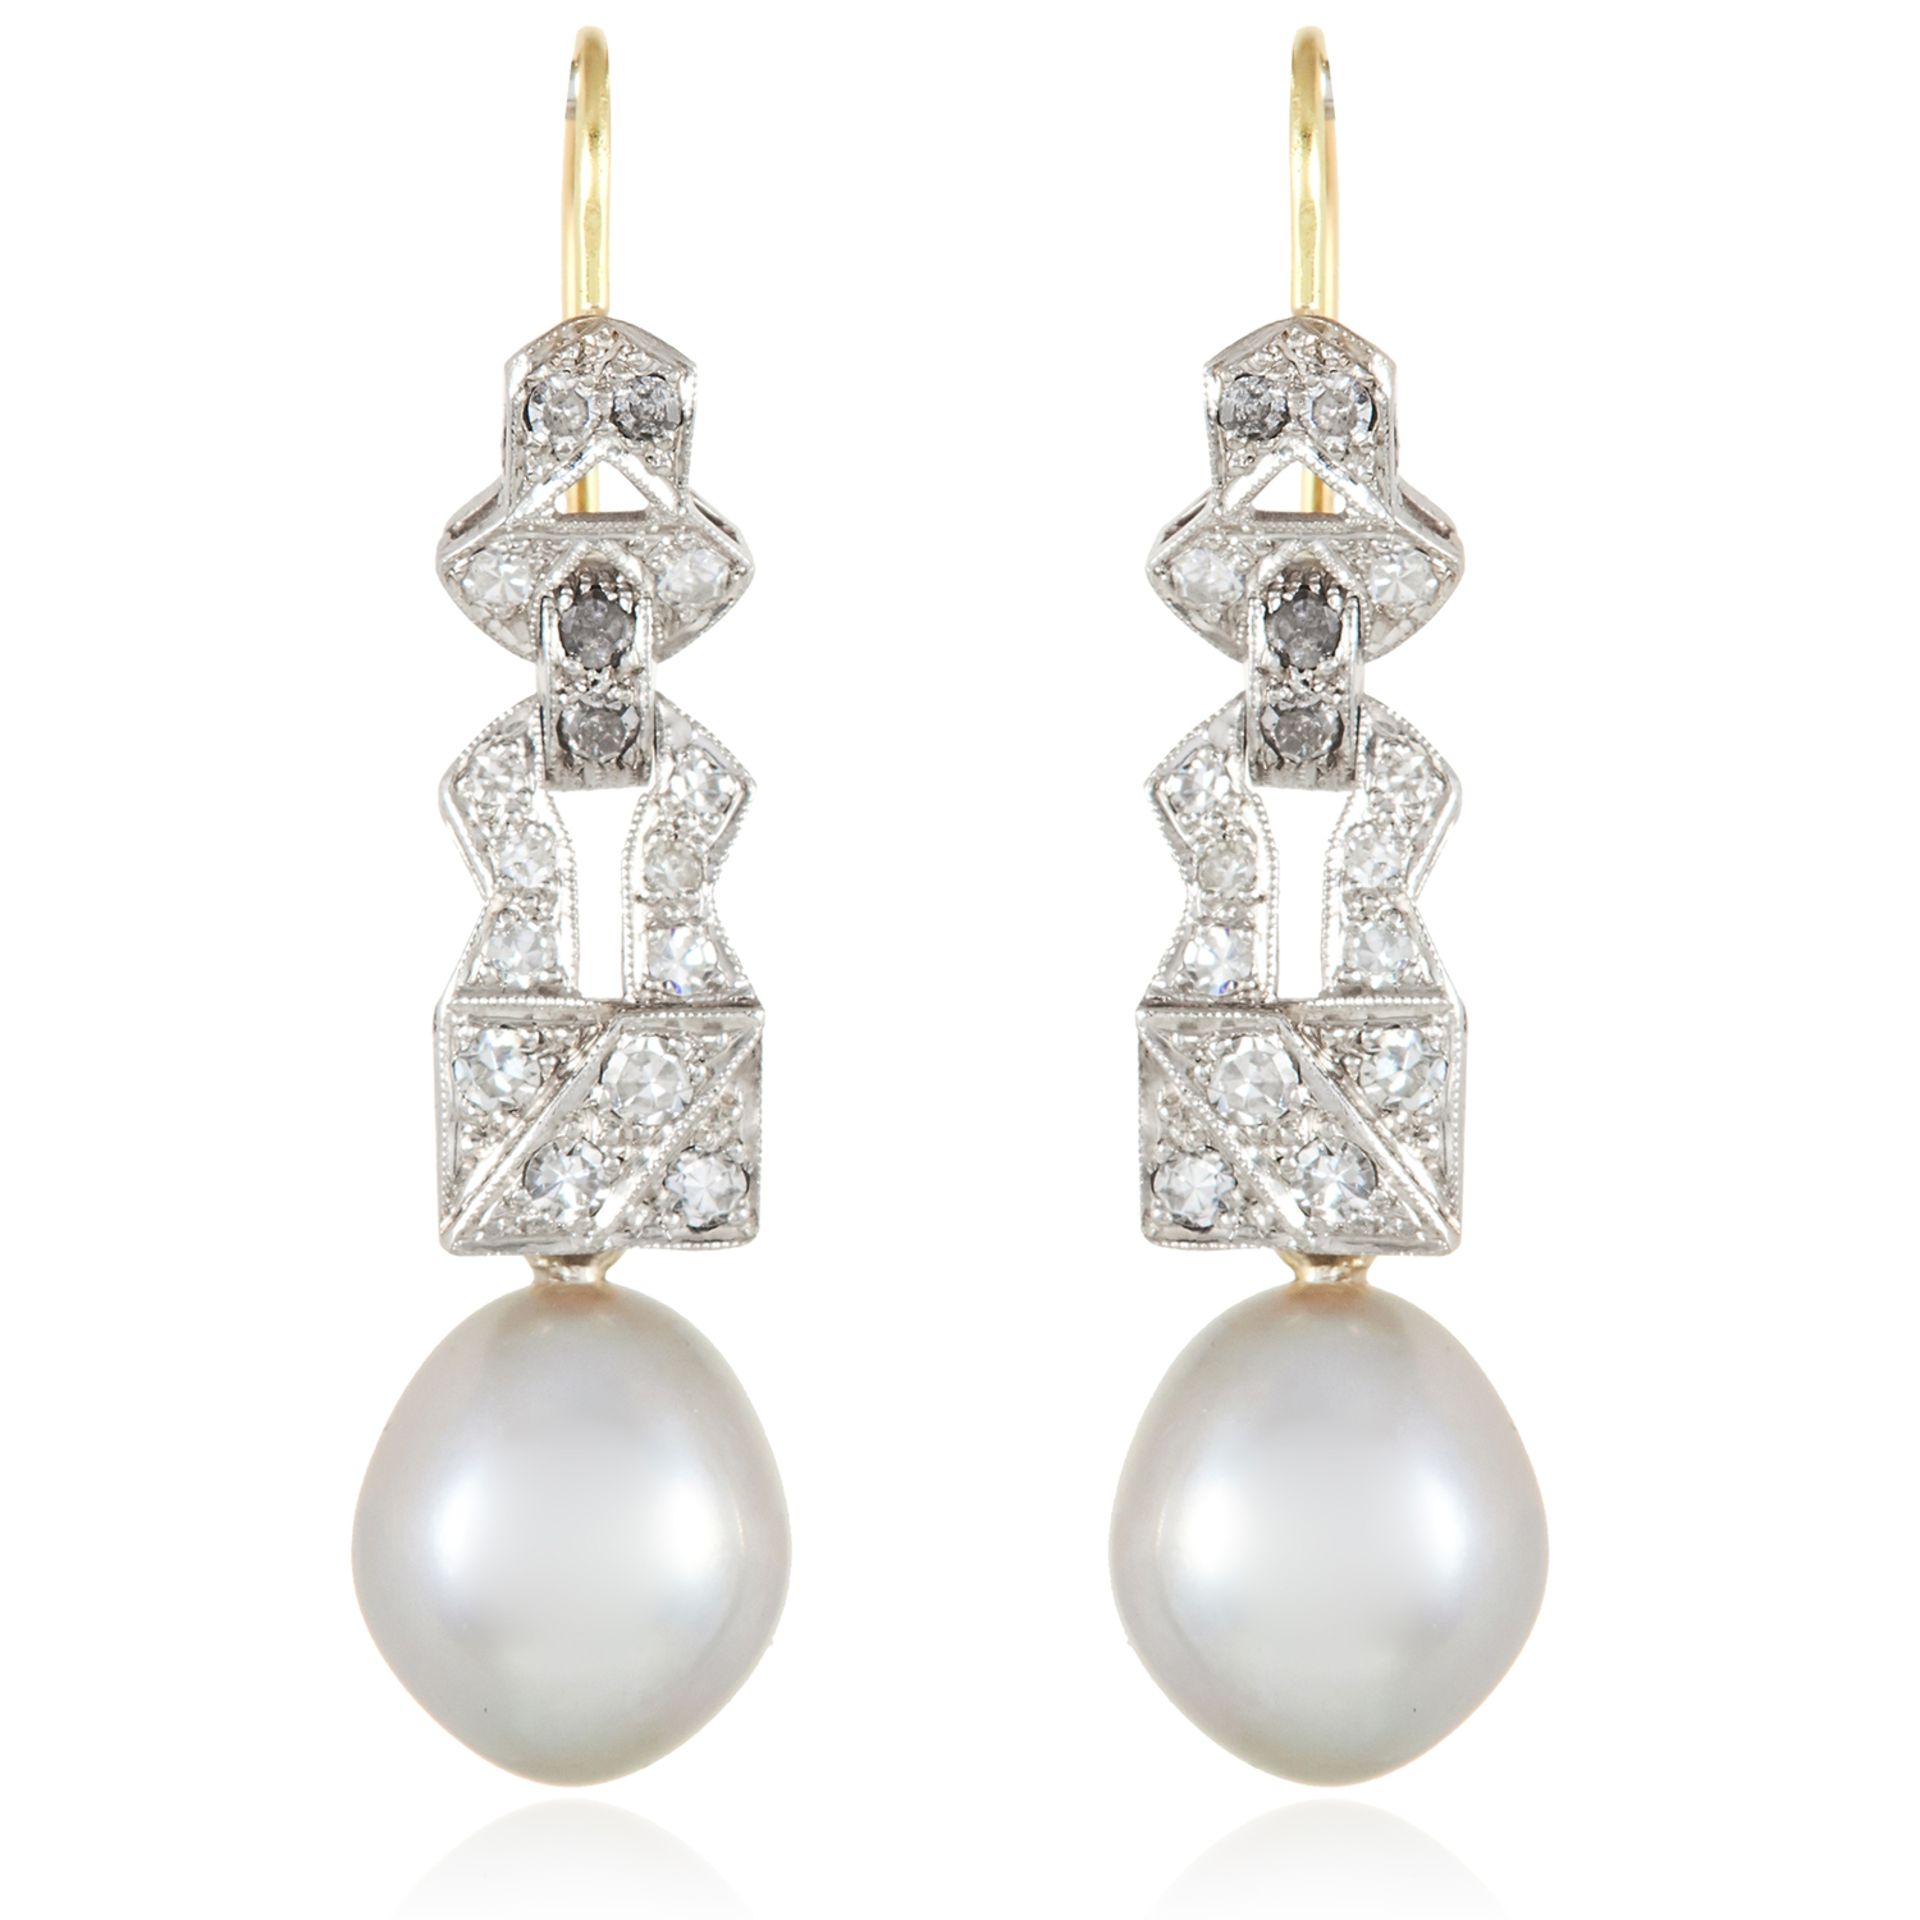 A PAIR OF ART DECO PEARL AND DIAMOND EARRINGS in 18ct yellow gold and platinum, each suspending a